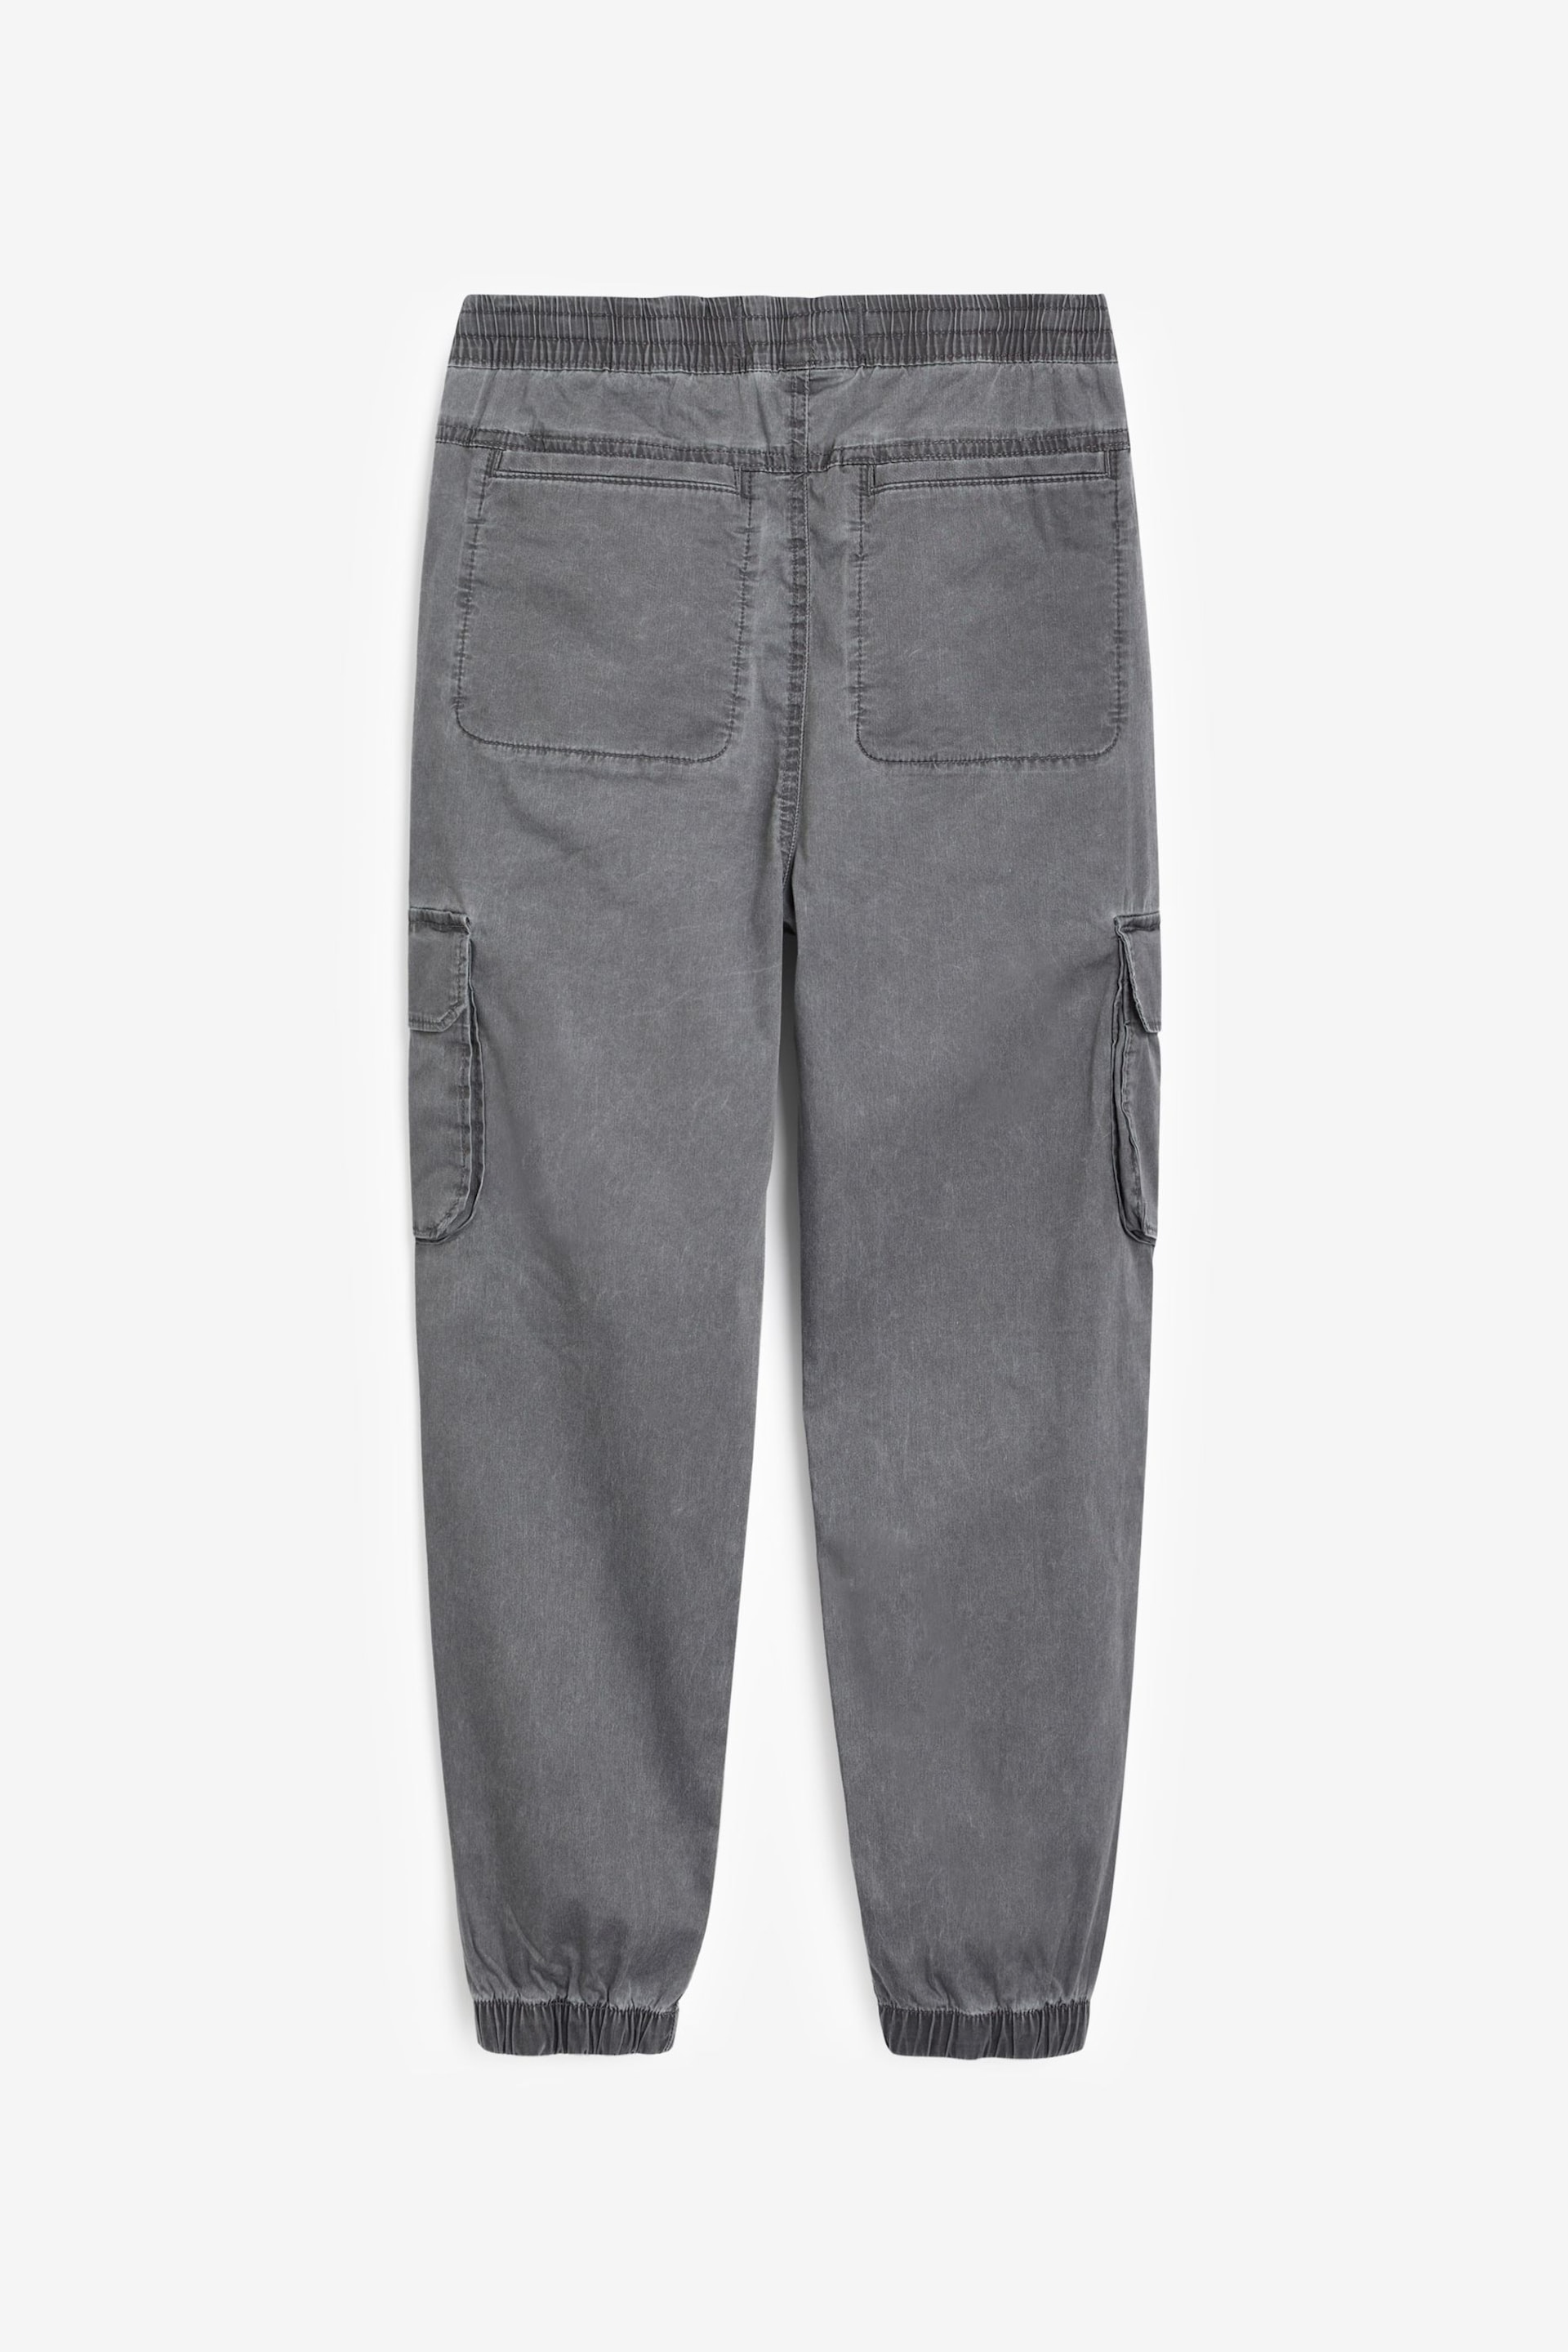 Abercrombie & Fitch Utility Cargo Black Trousers - Image 2 of 6